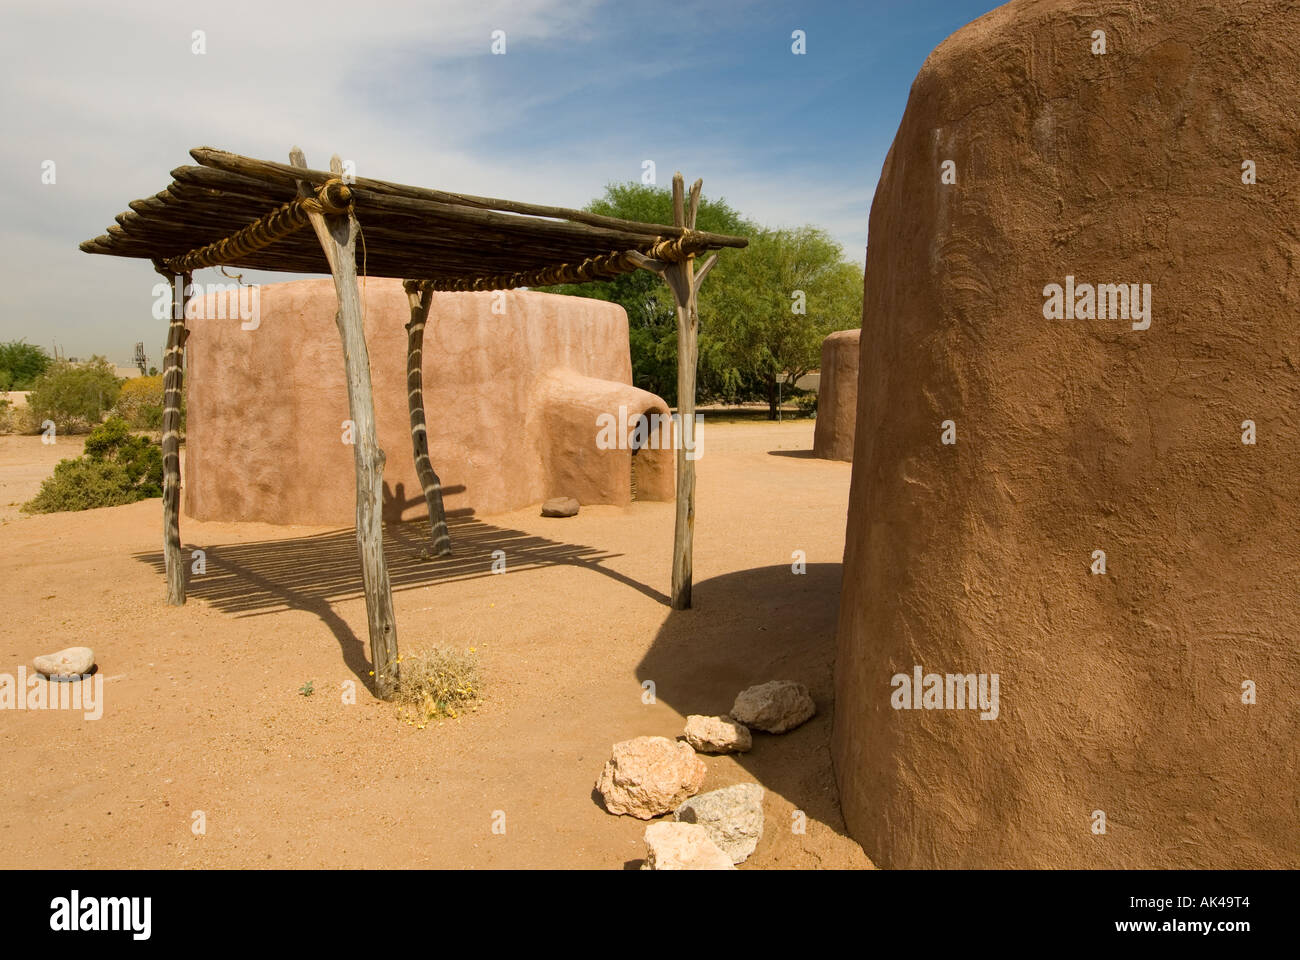 ARIZONA PHOENIX Pueble Grand Museum Archaeological Park Native American History and Artifacts Adobe hut displayed on grounds Stock Photo